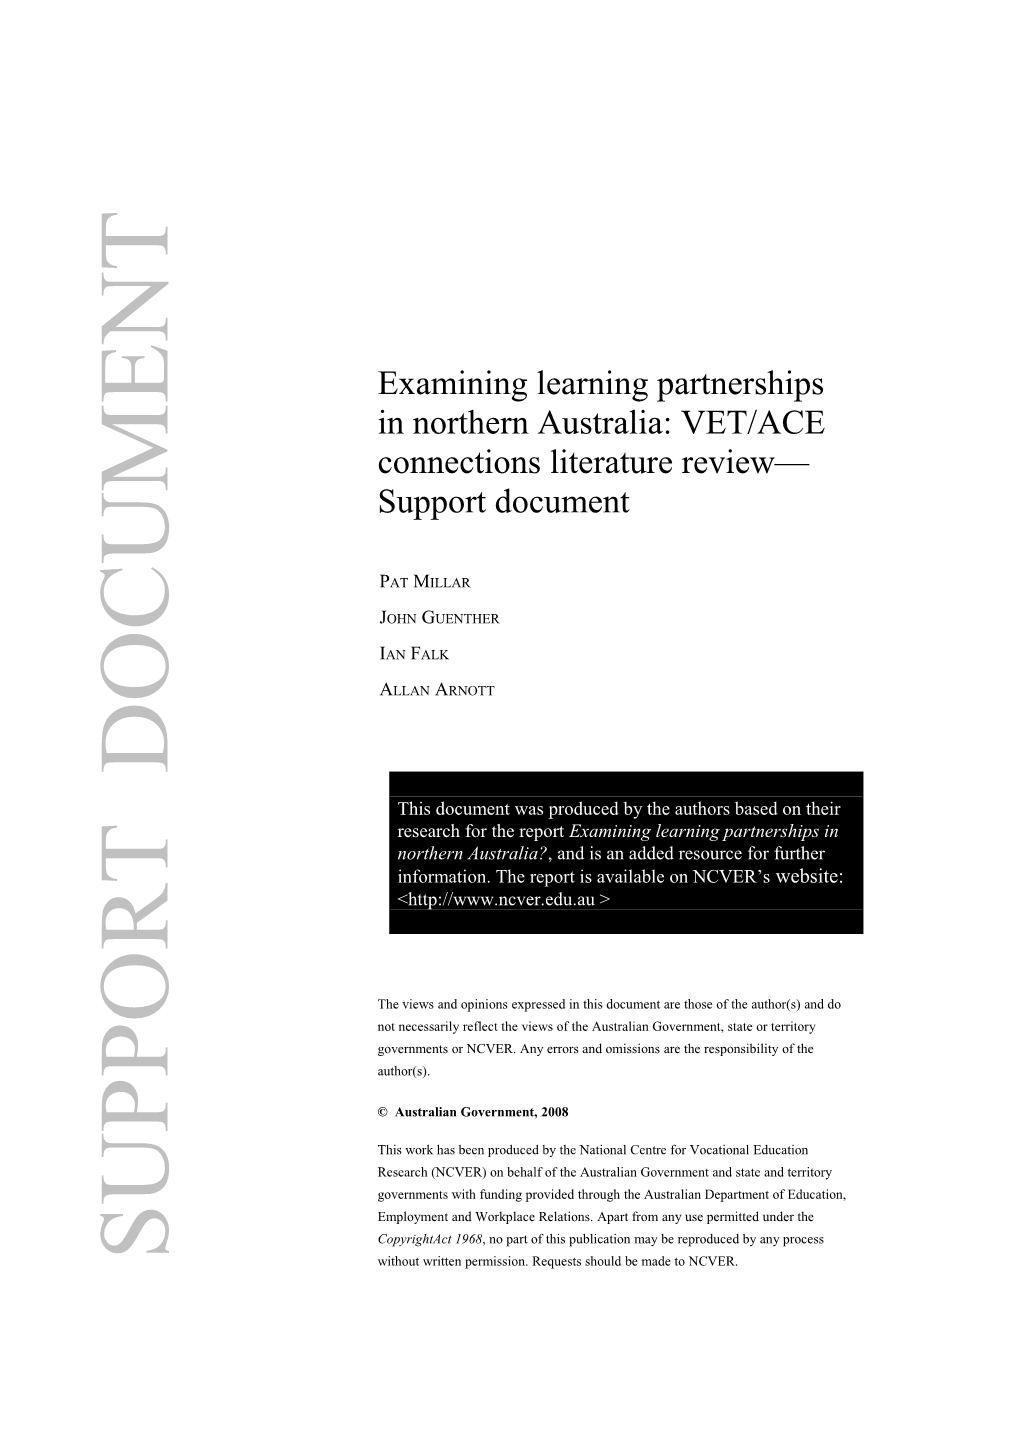 Examining Learning Partnerships in Northern Australia: VET/ACE Connections Literature Review